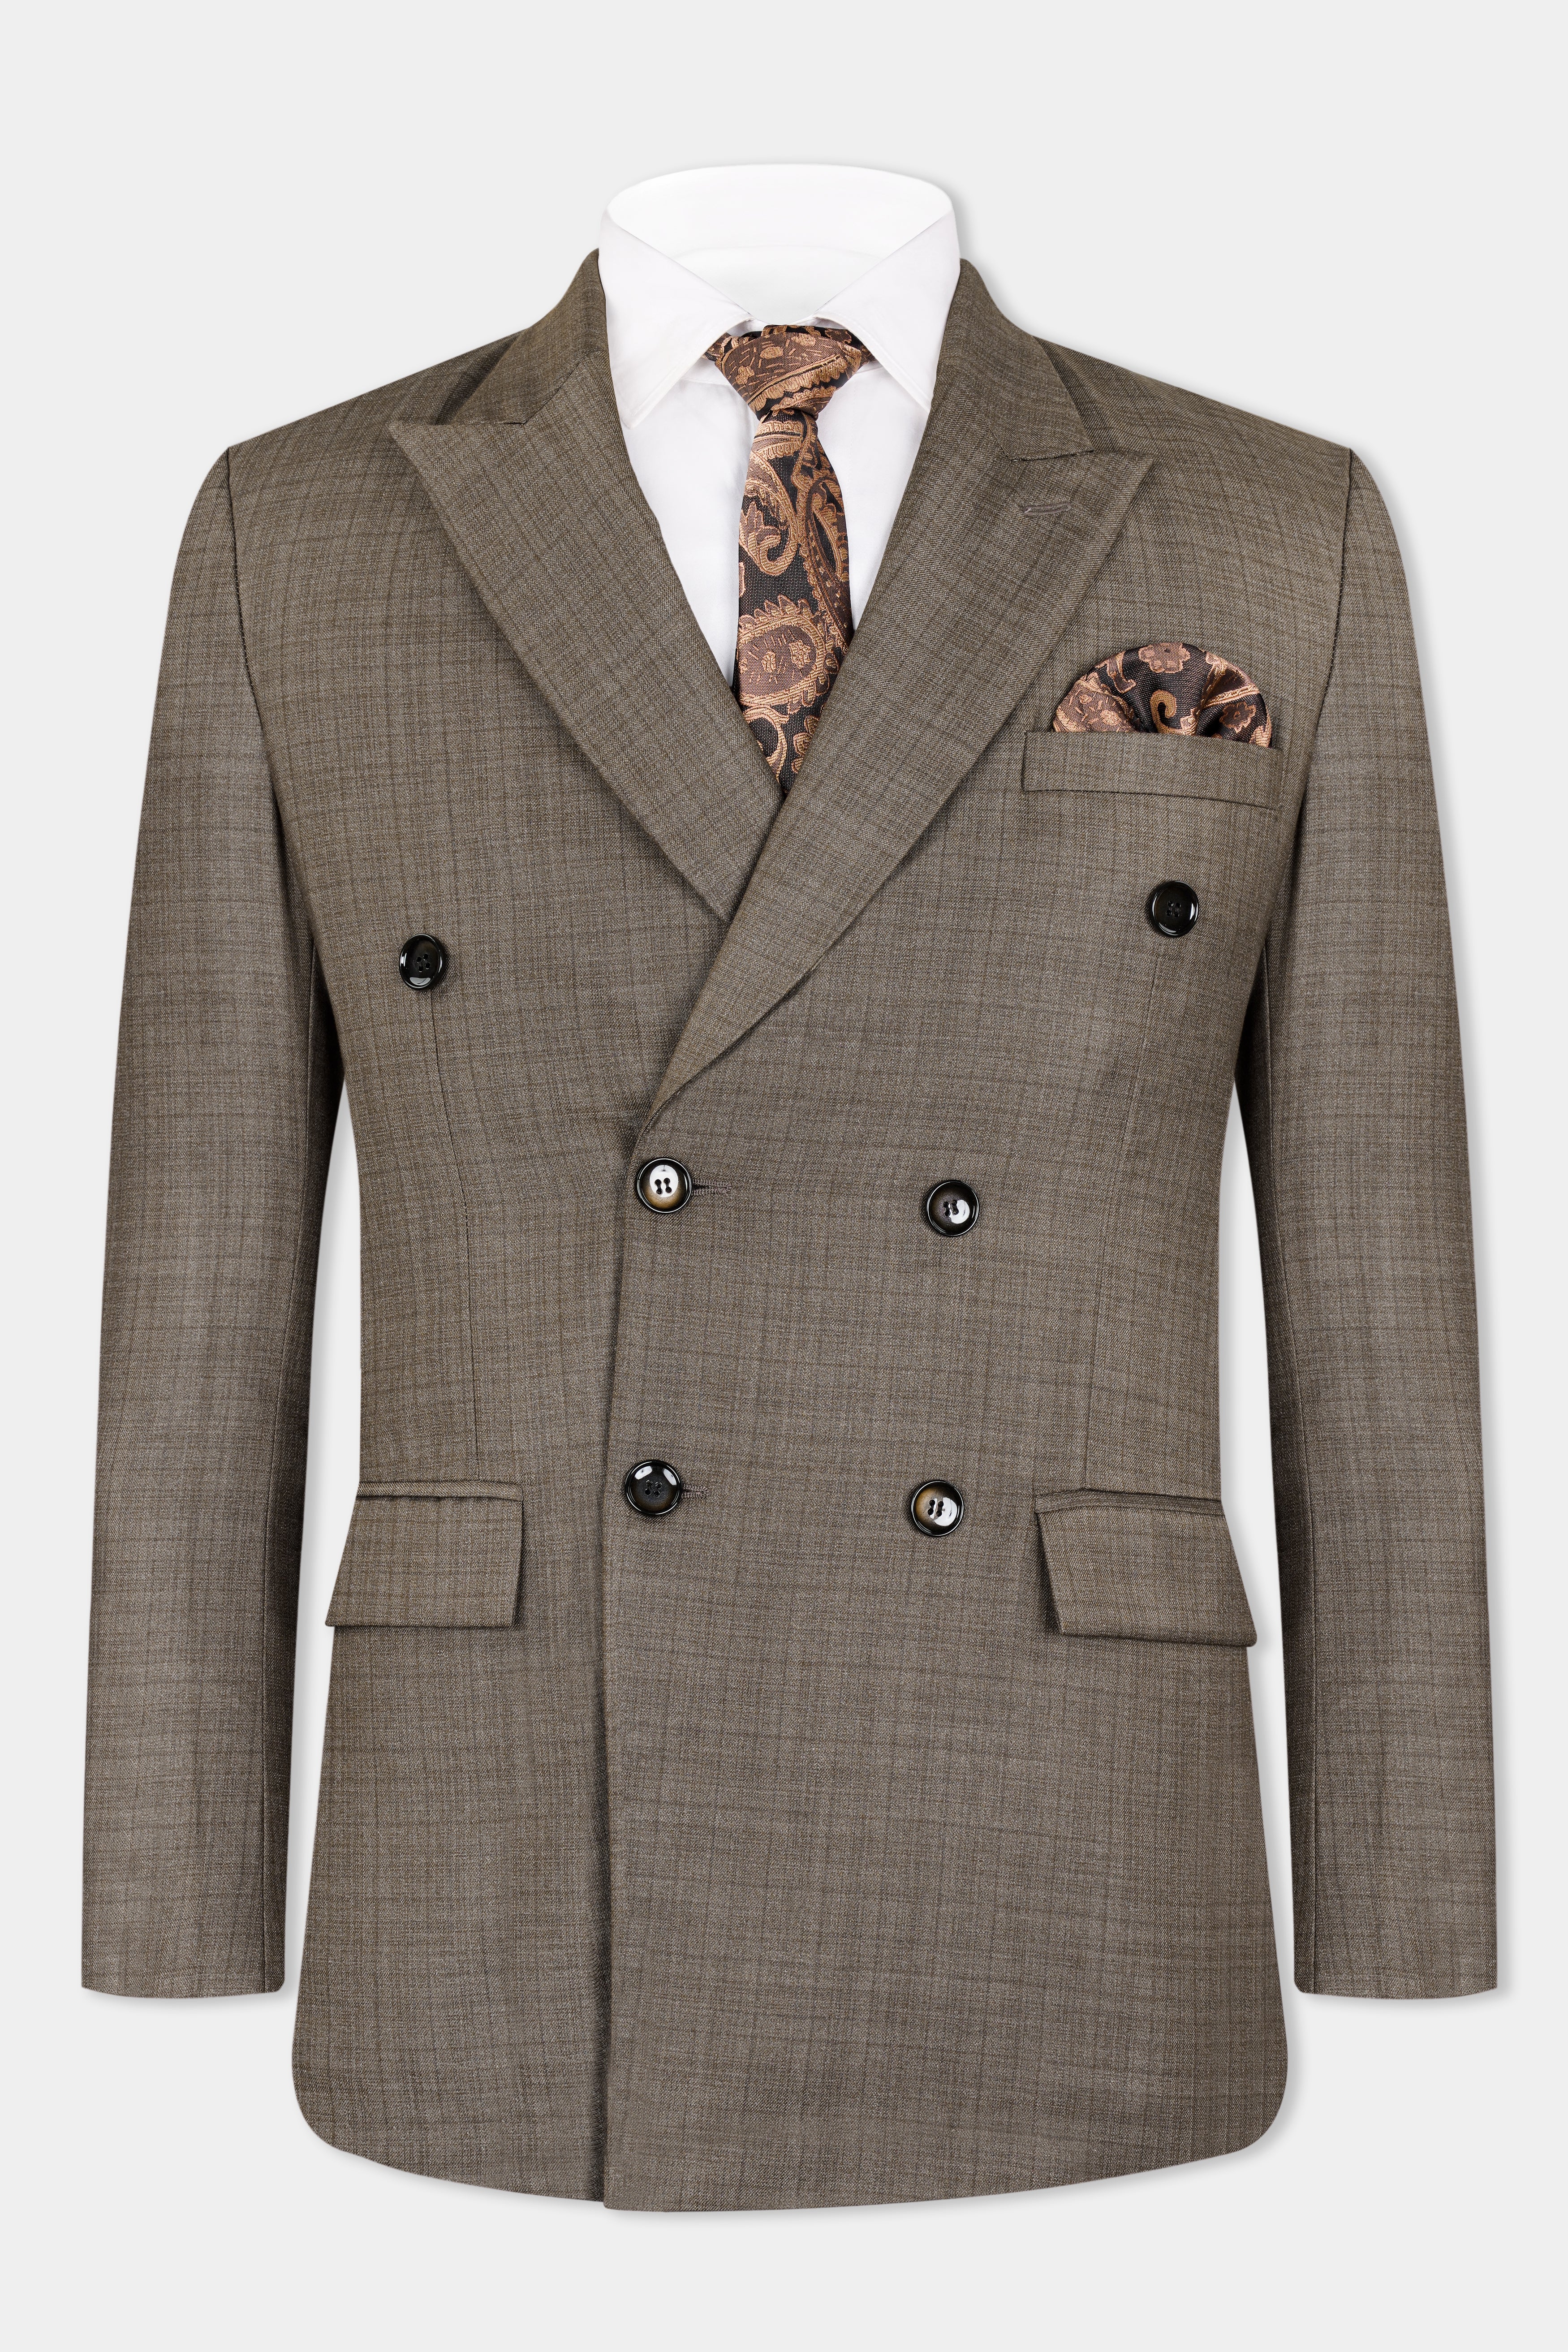 Hemp Brown Checkered Wool Rich Double Breasted Blazer BL2935-DB-36, BL2935-DB-38, BL2935-DB-40, BL2935-DB-42, BL2935-DB-44, BL2935-DB-46, BL2935-DB-48, BL2935-DB-50, BL2935-DB-52, BL2935-DB-54, BL2935-DB-56, BL2935-DB-58, BL2935-DB-60